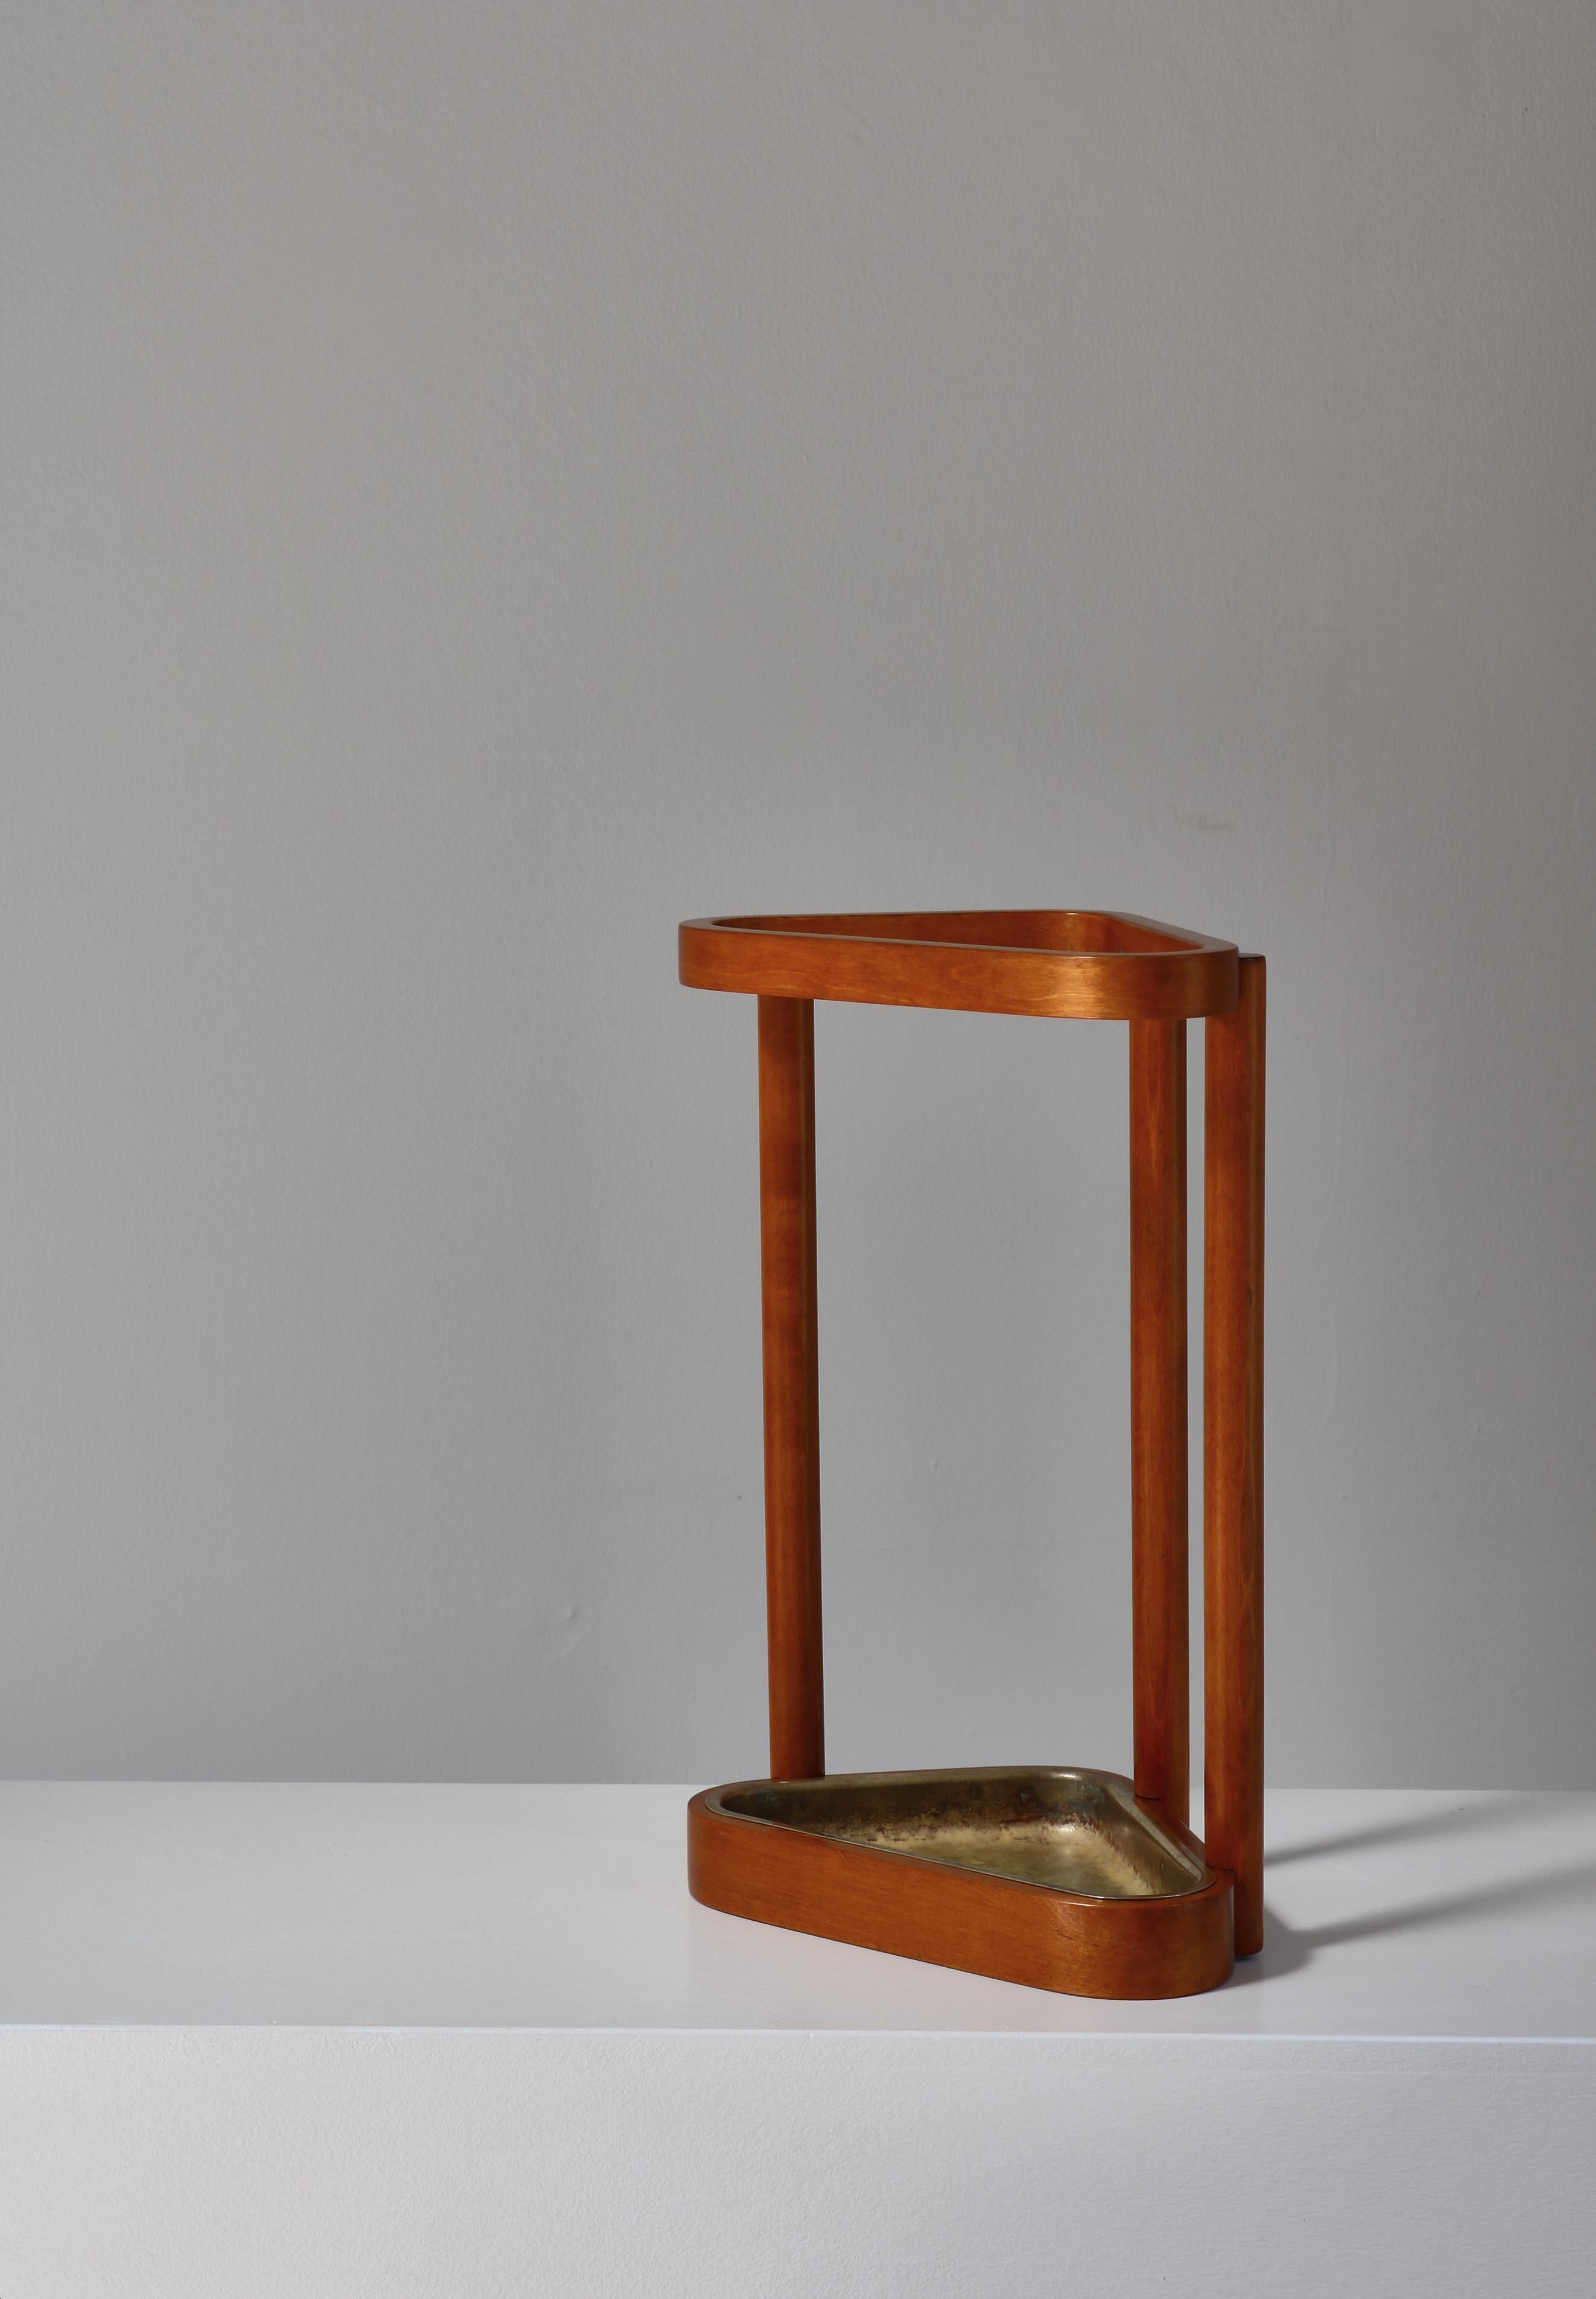 Rare early Umbrella stand model no. 115 designed by Alvar Aalto in 1936. This example was manufactured in the 1940s. This umbrella stand brings together birch and brass in a structure composed of three solid birch pillars united by two hand-bent